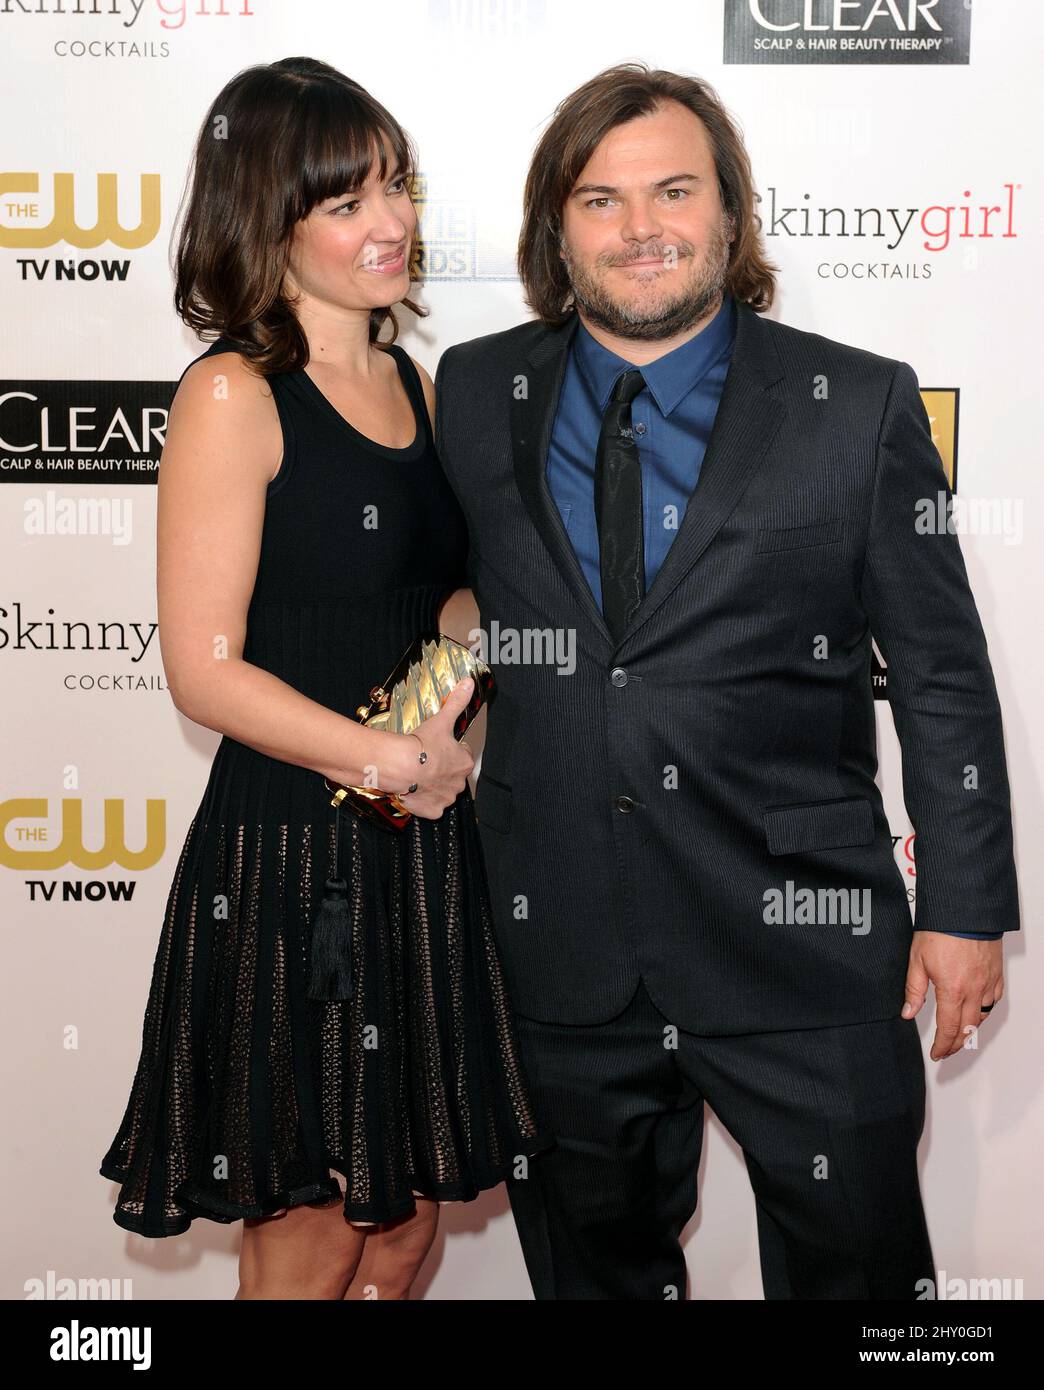 https://c8.alamy.com/comp/2HY0GD1/jack-black-and-wife-tanya-haden-arriving-for-the-2013-critics-choice-movie-awards-held-at-barker-hanger-los-angeles-california-2HY0GD1.jpg